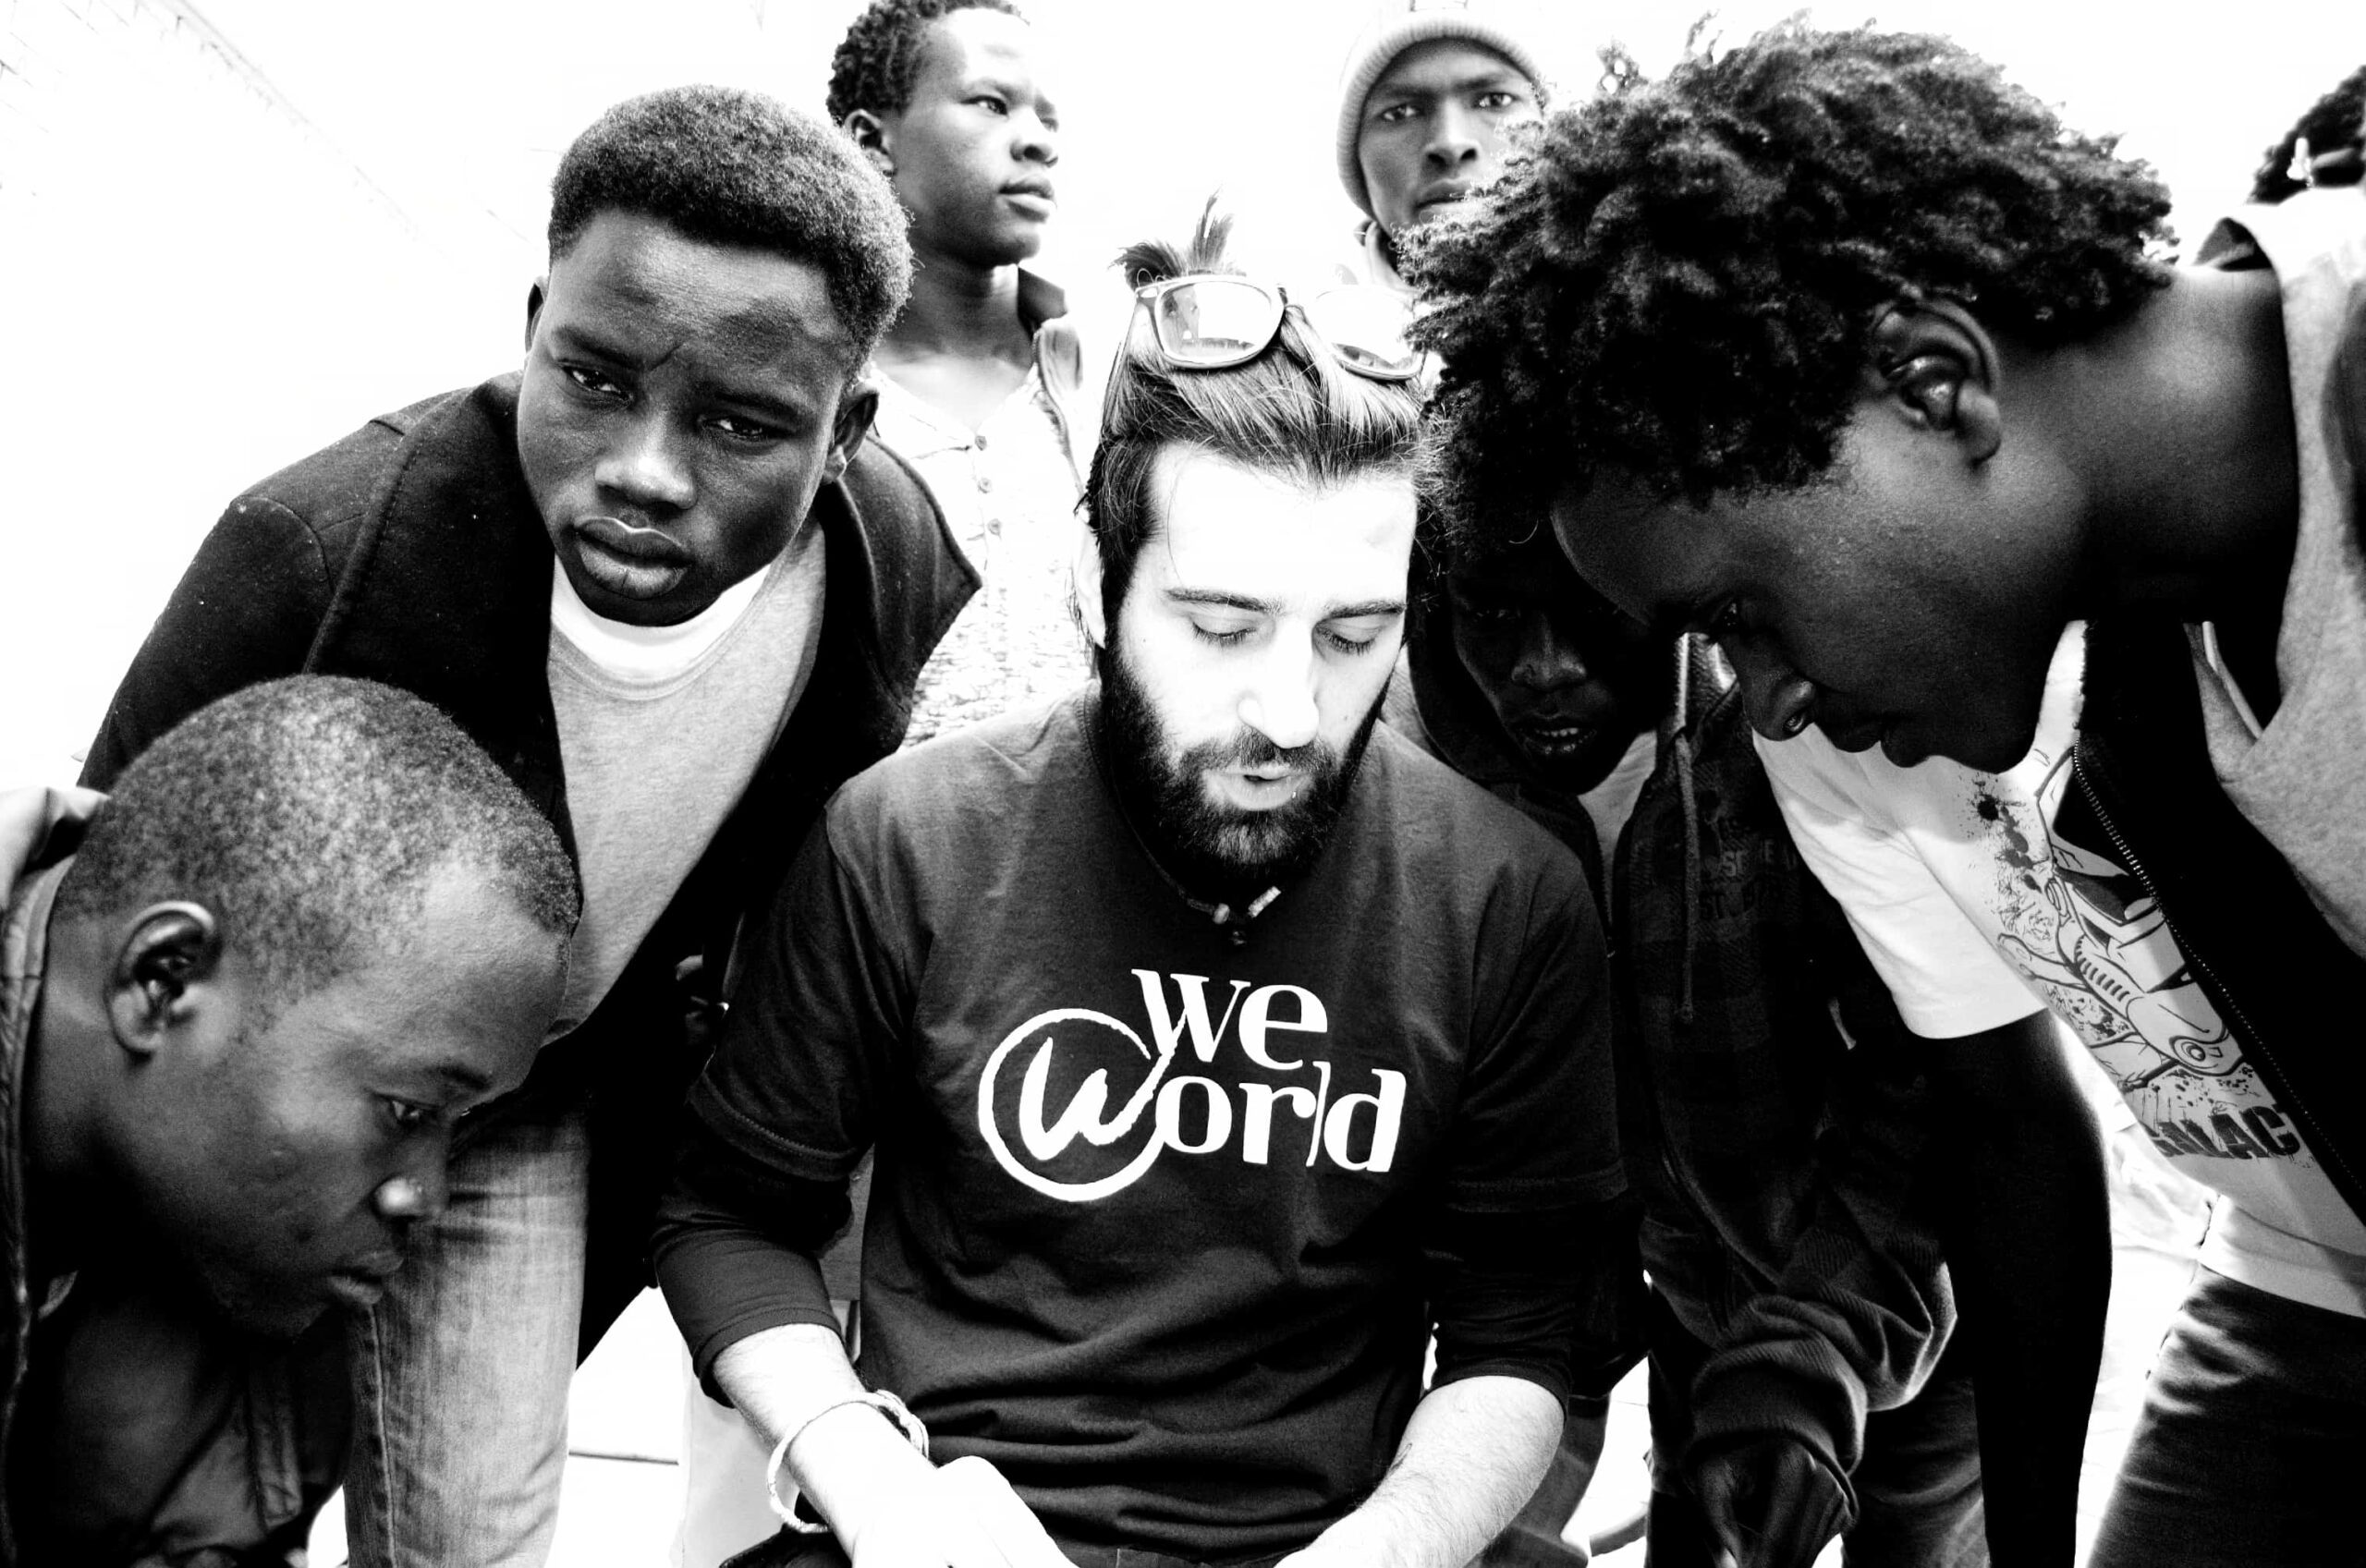 A white man with a beard sits. A group of young black men stand around him.